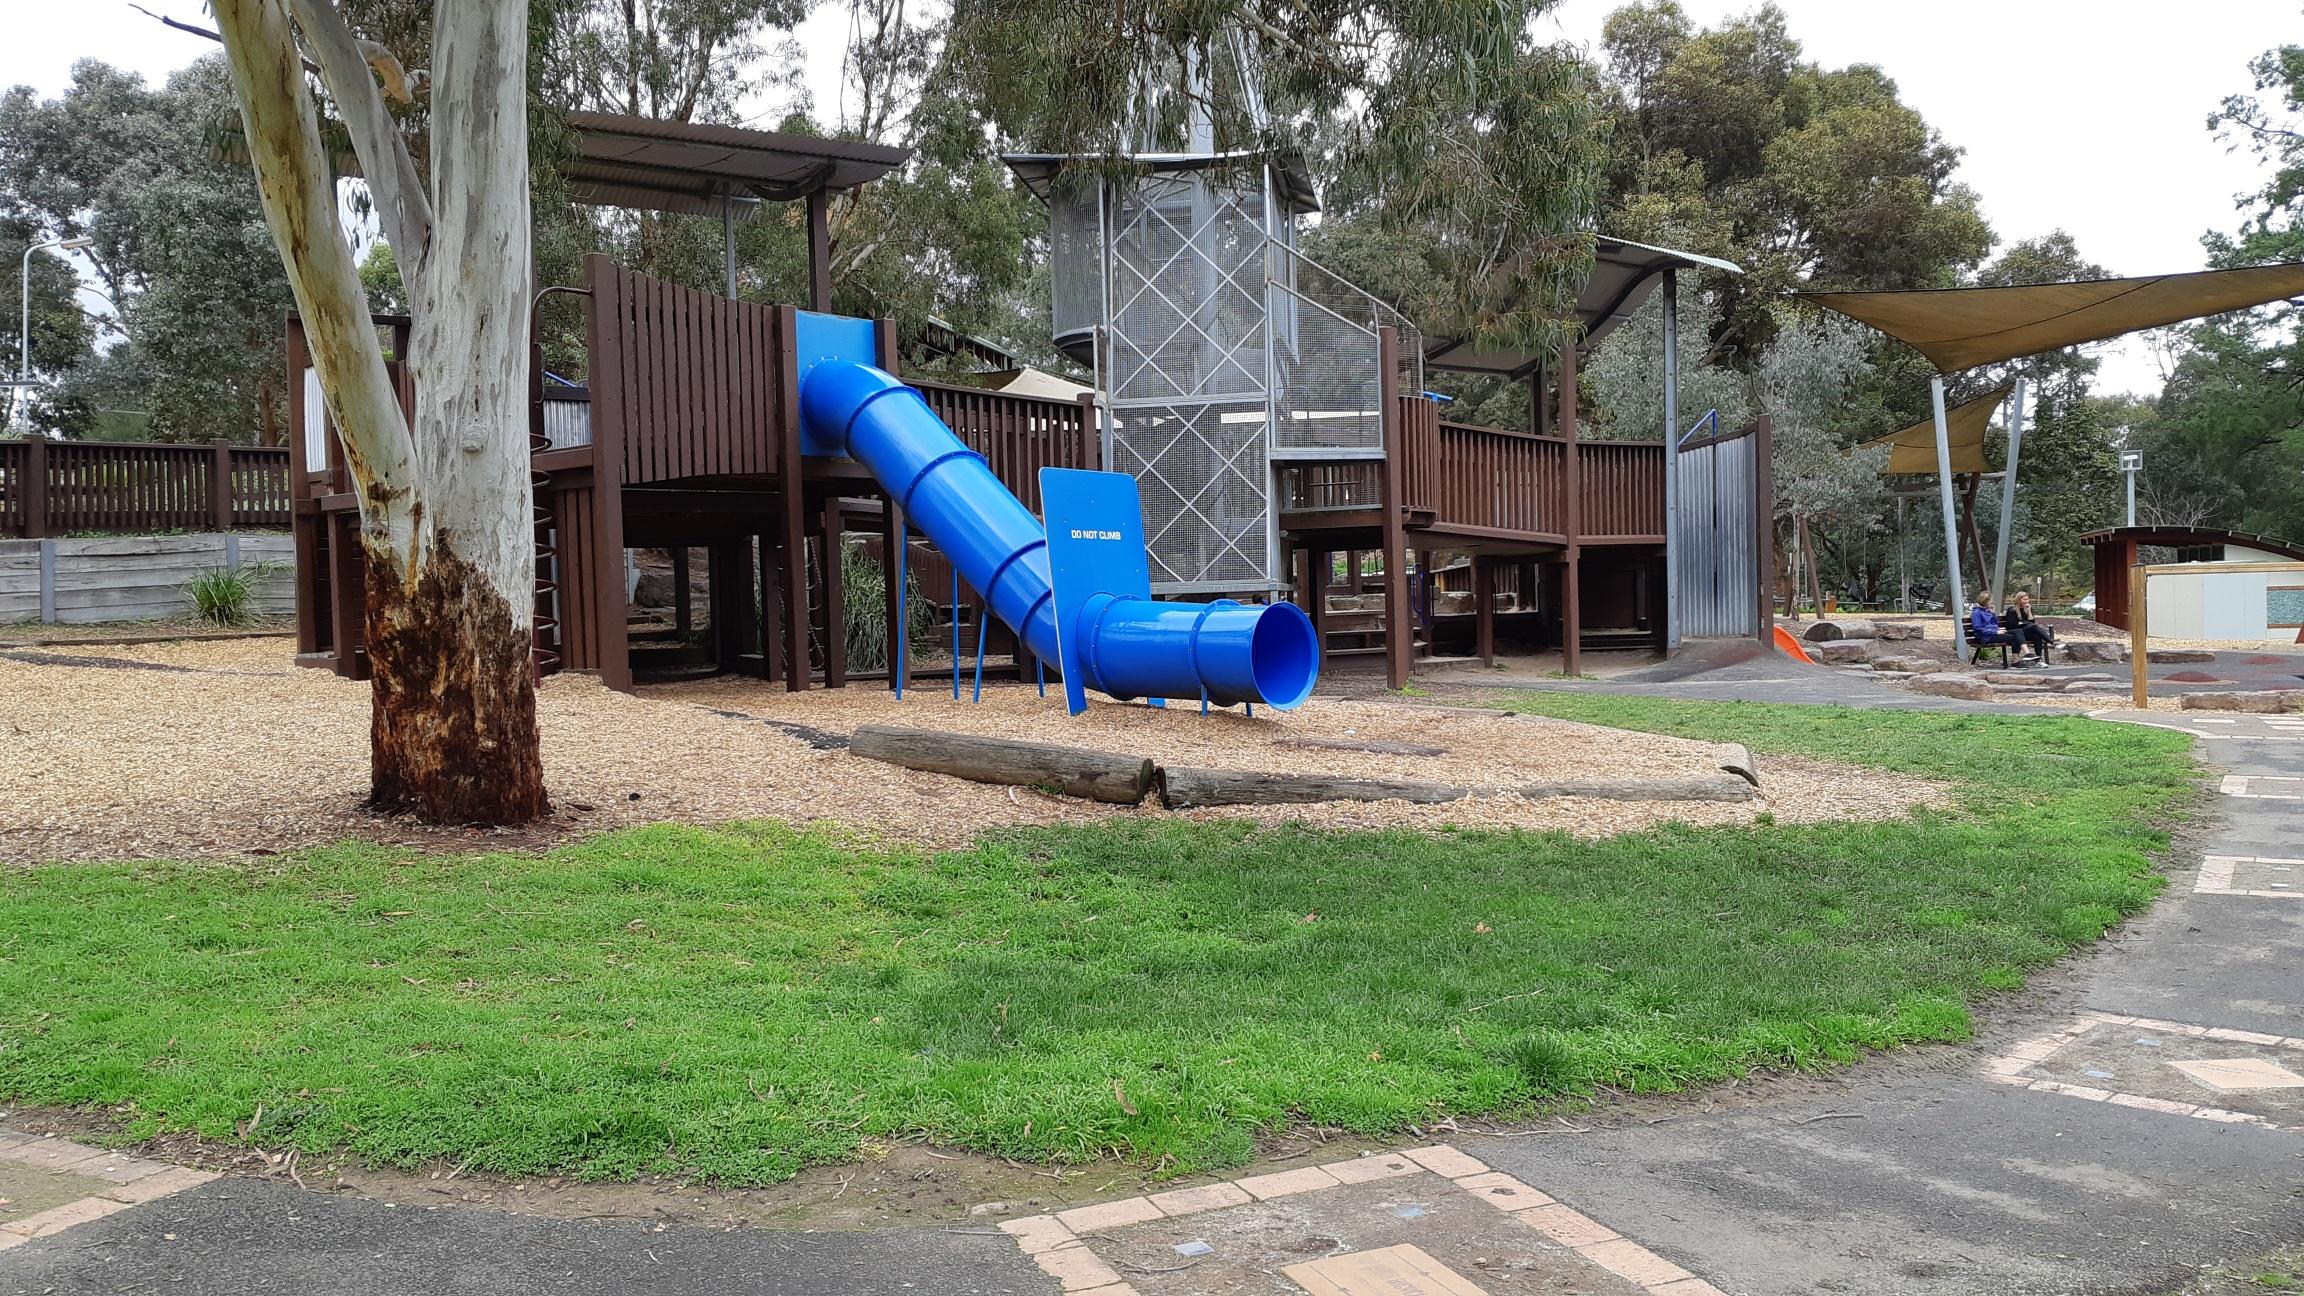 Wooden play structure with enclosed blue slide surrounded by gum trees